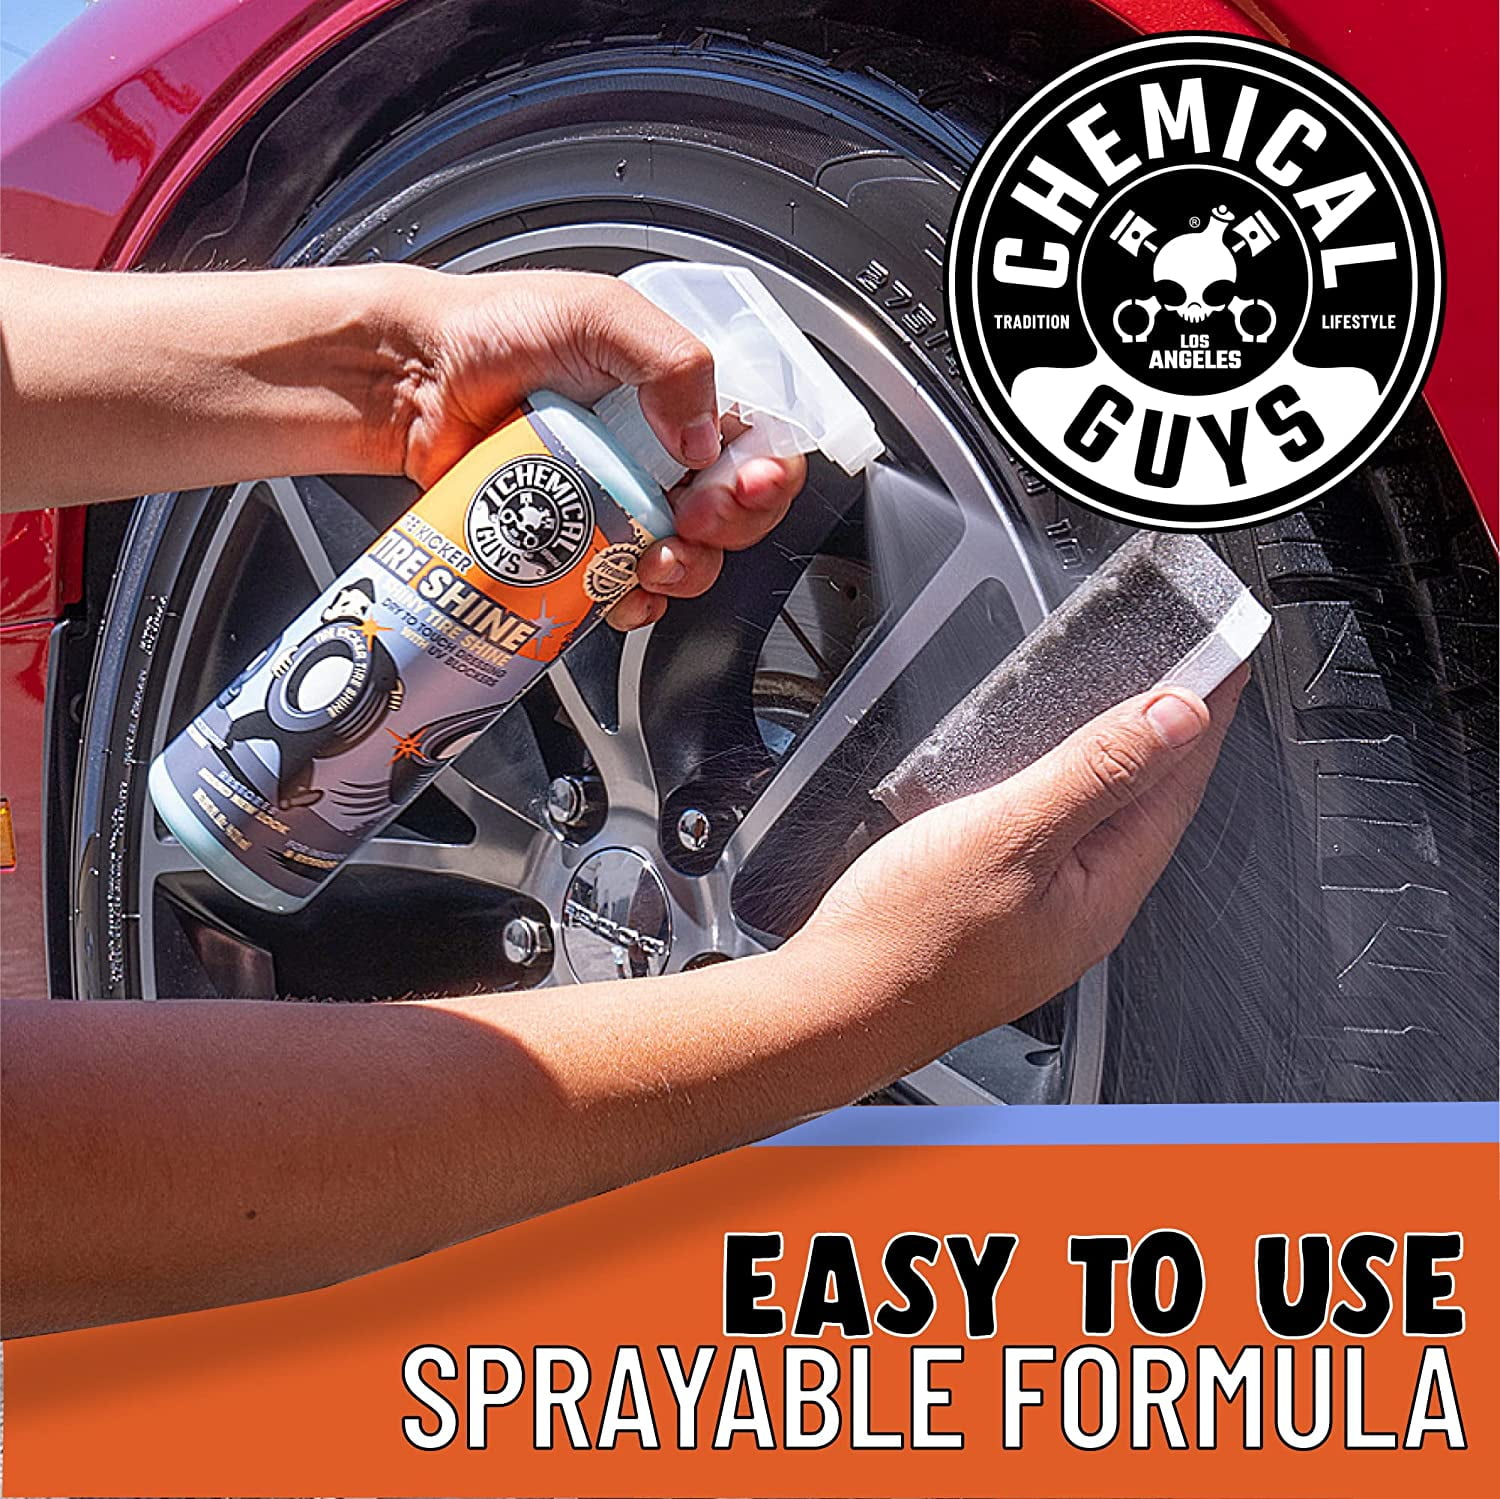 Chemical Guys TVD113 Tire Kicker Sprayable Extra Glossy Tire Shine (Works  on Rubber, Vinyl & Plastic) Safe for Cars, Trucks, Motorcycles, RVs & More